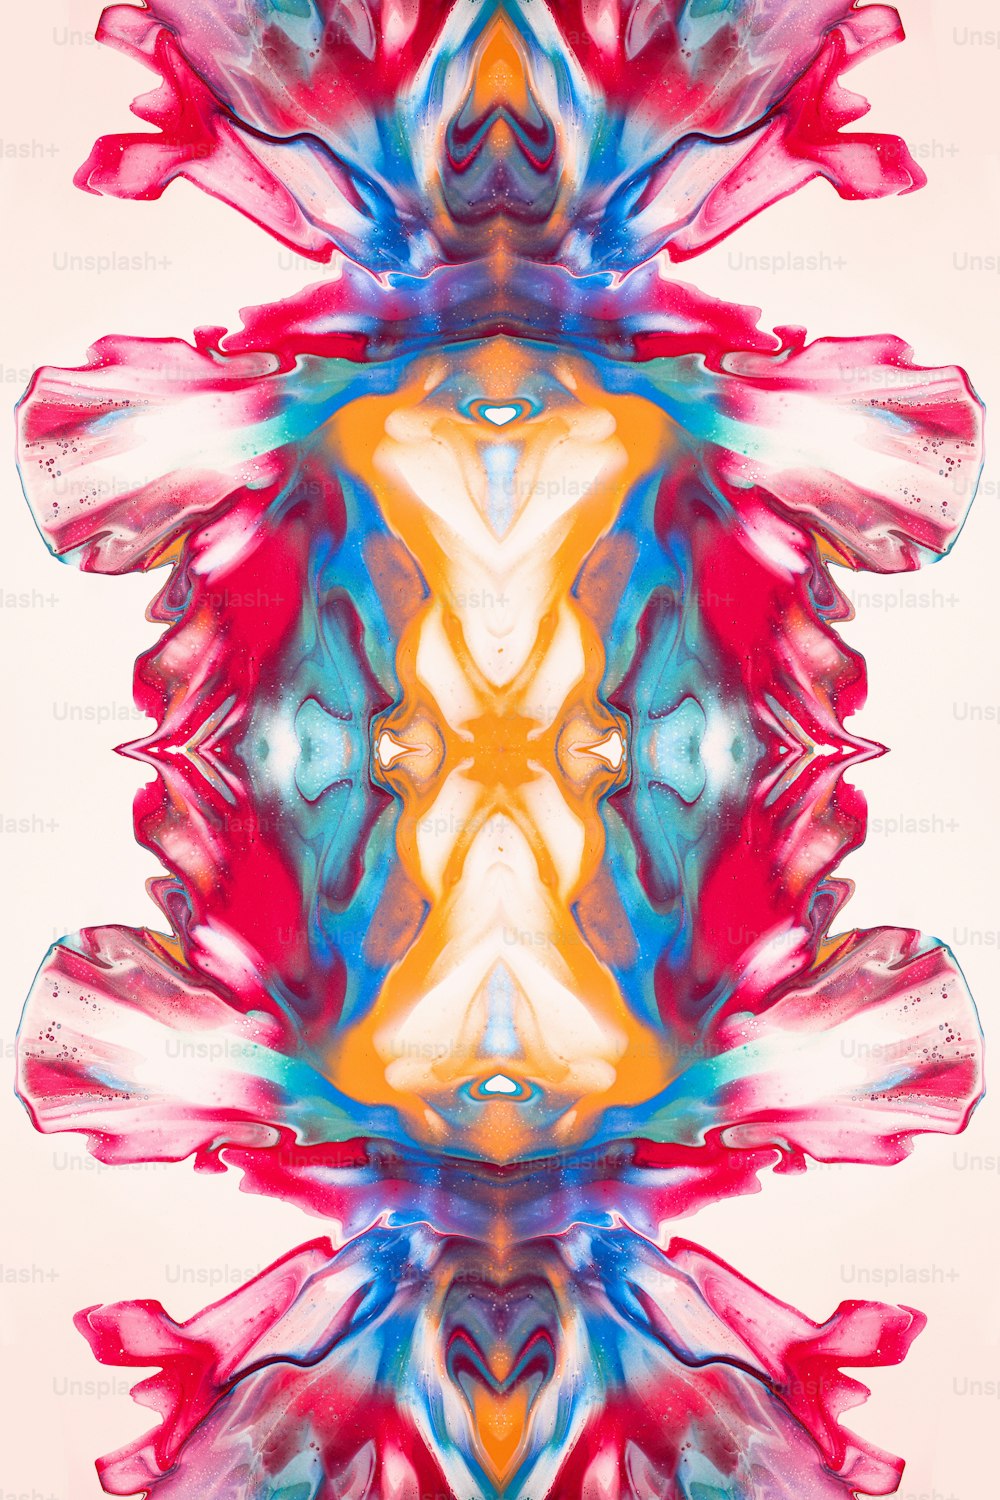 a multicolored image of an abstract design